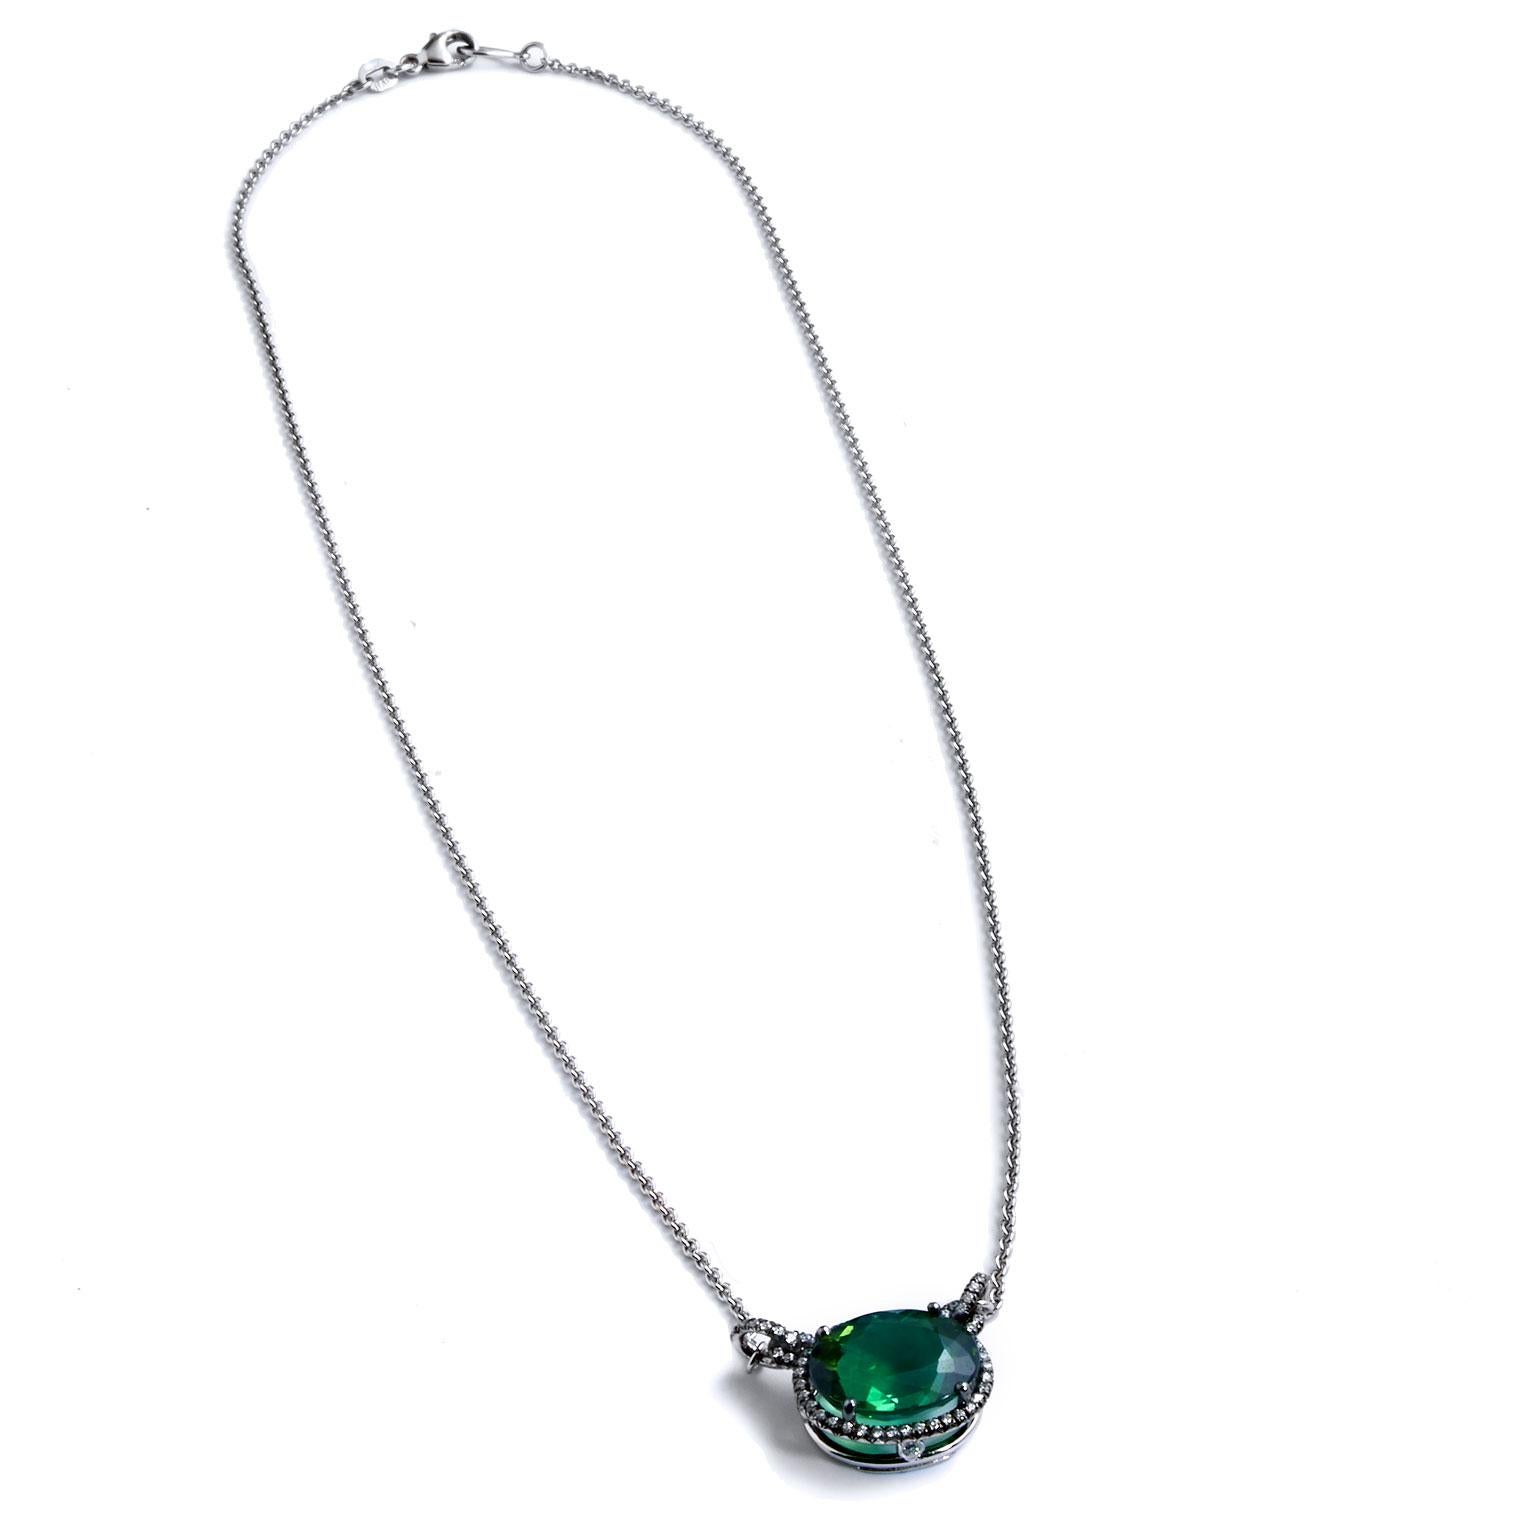 Oval Cut 6.43 Carat Green Tourmaline and Diamond Pendant Halo Necklace in 18 karat Gold  For Sale